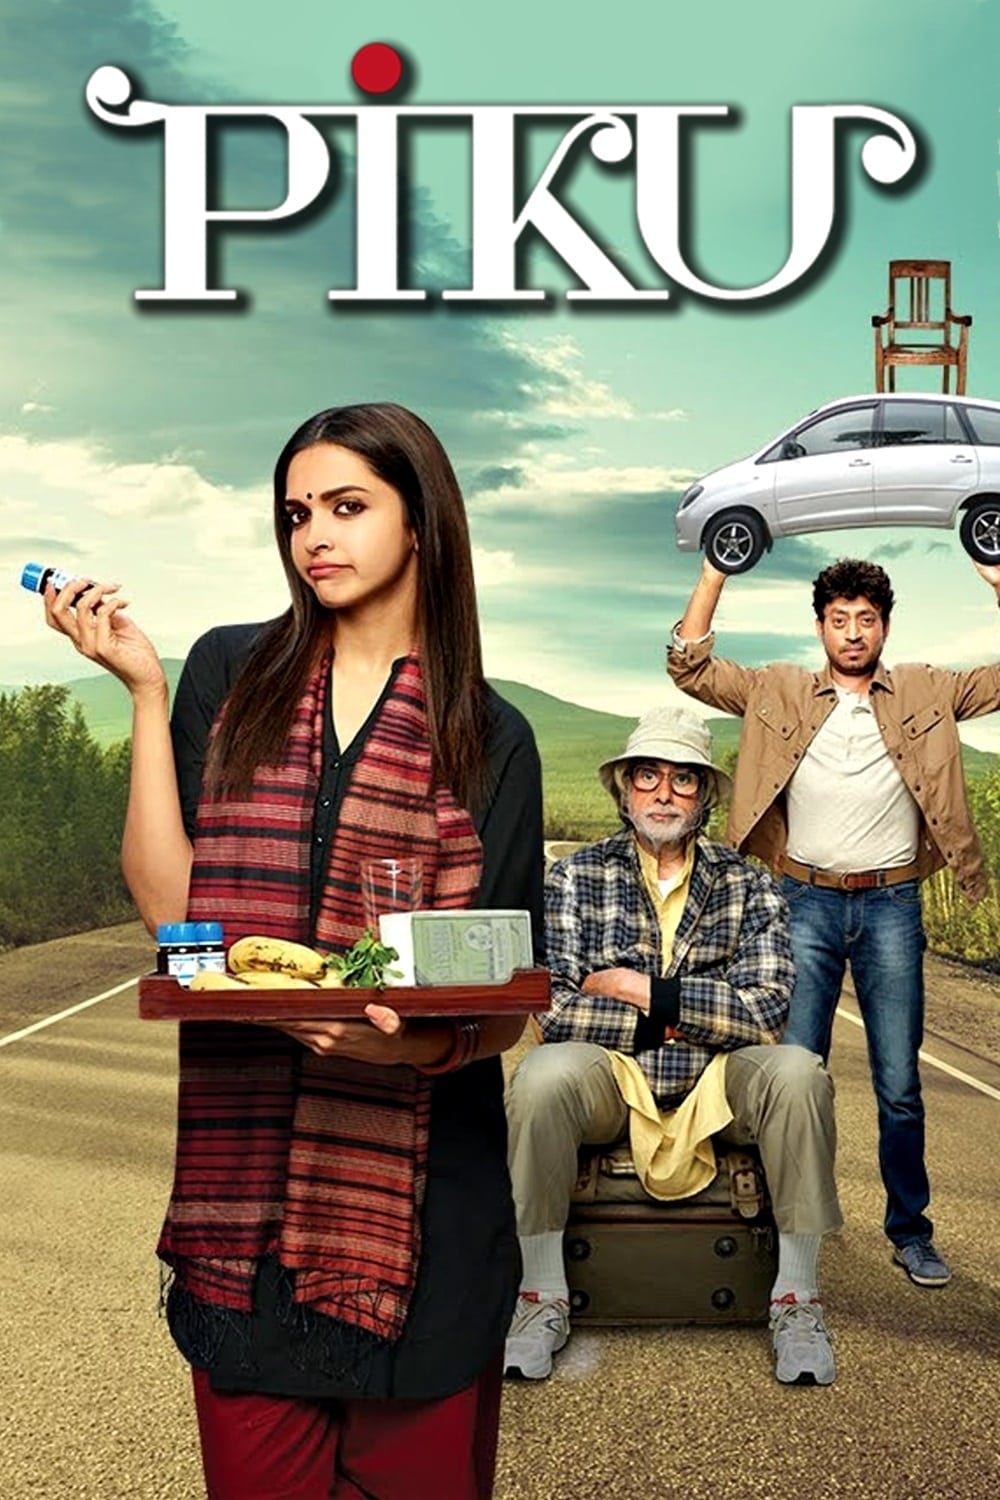 Poster for the movie "Piku"